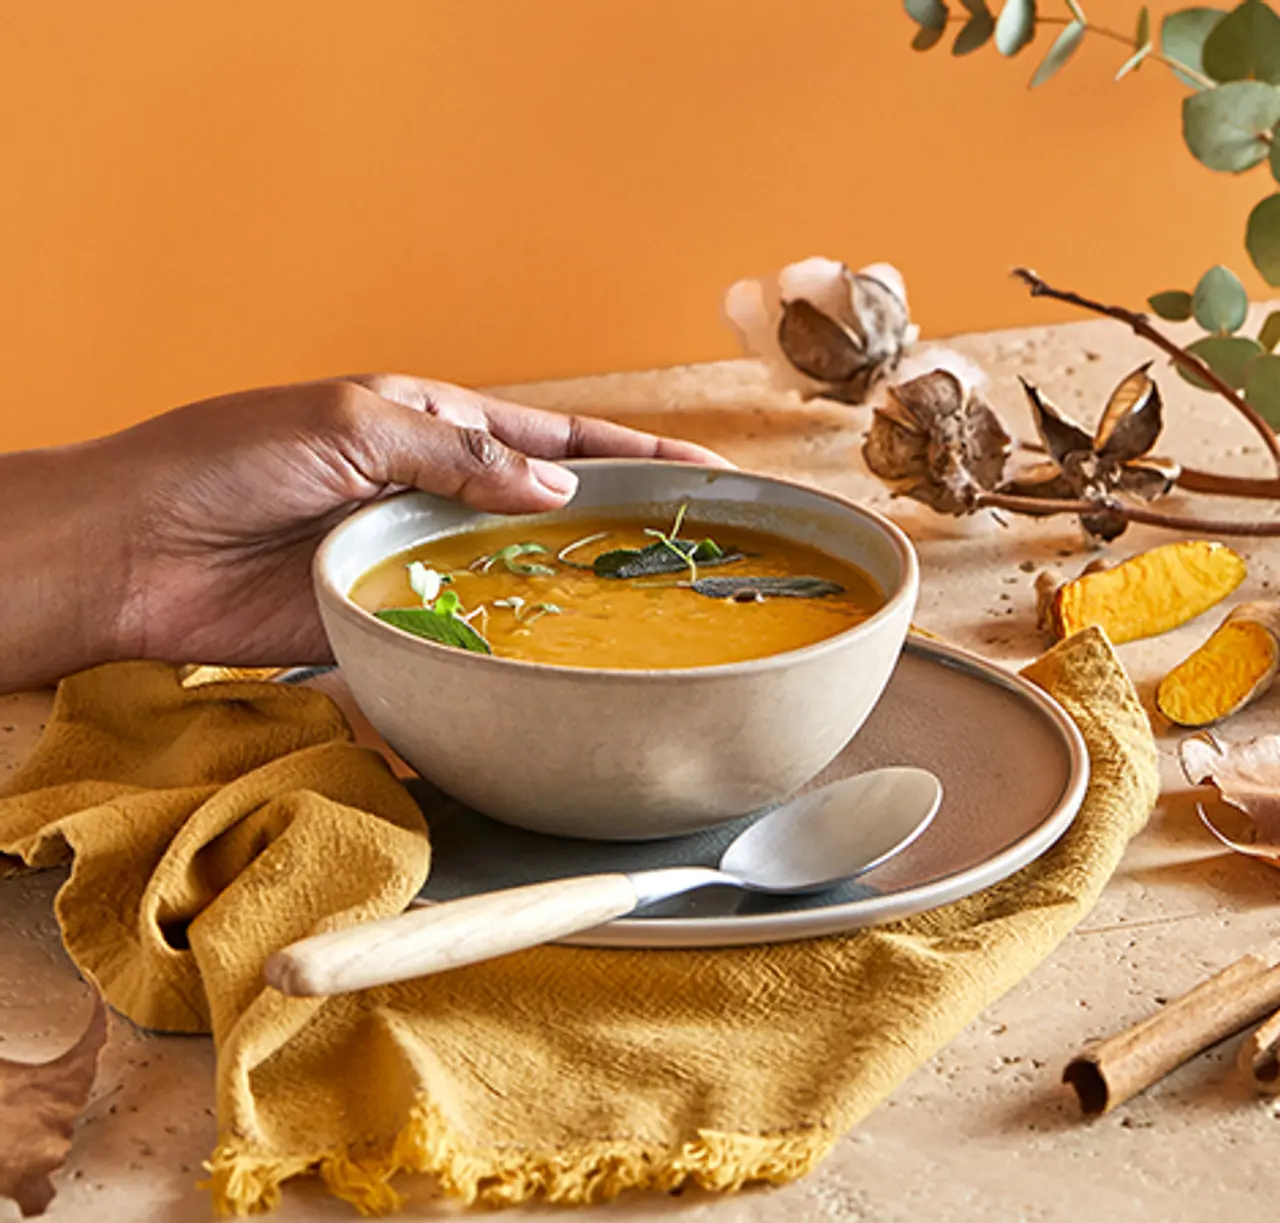 A person's hand is holding a bowl of creamy soup garnished with herbs on a table with autumnal decor.